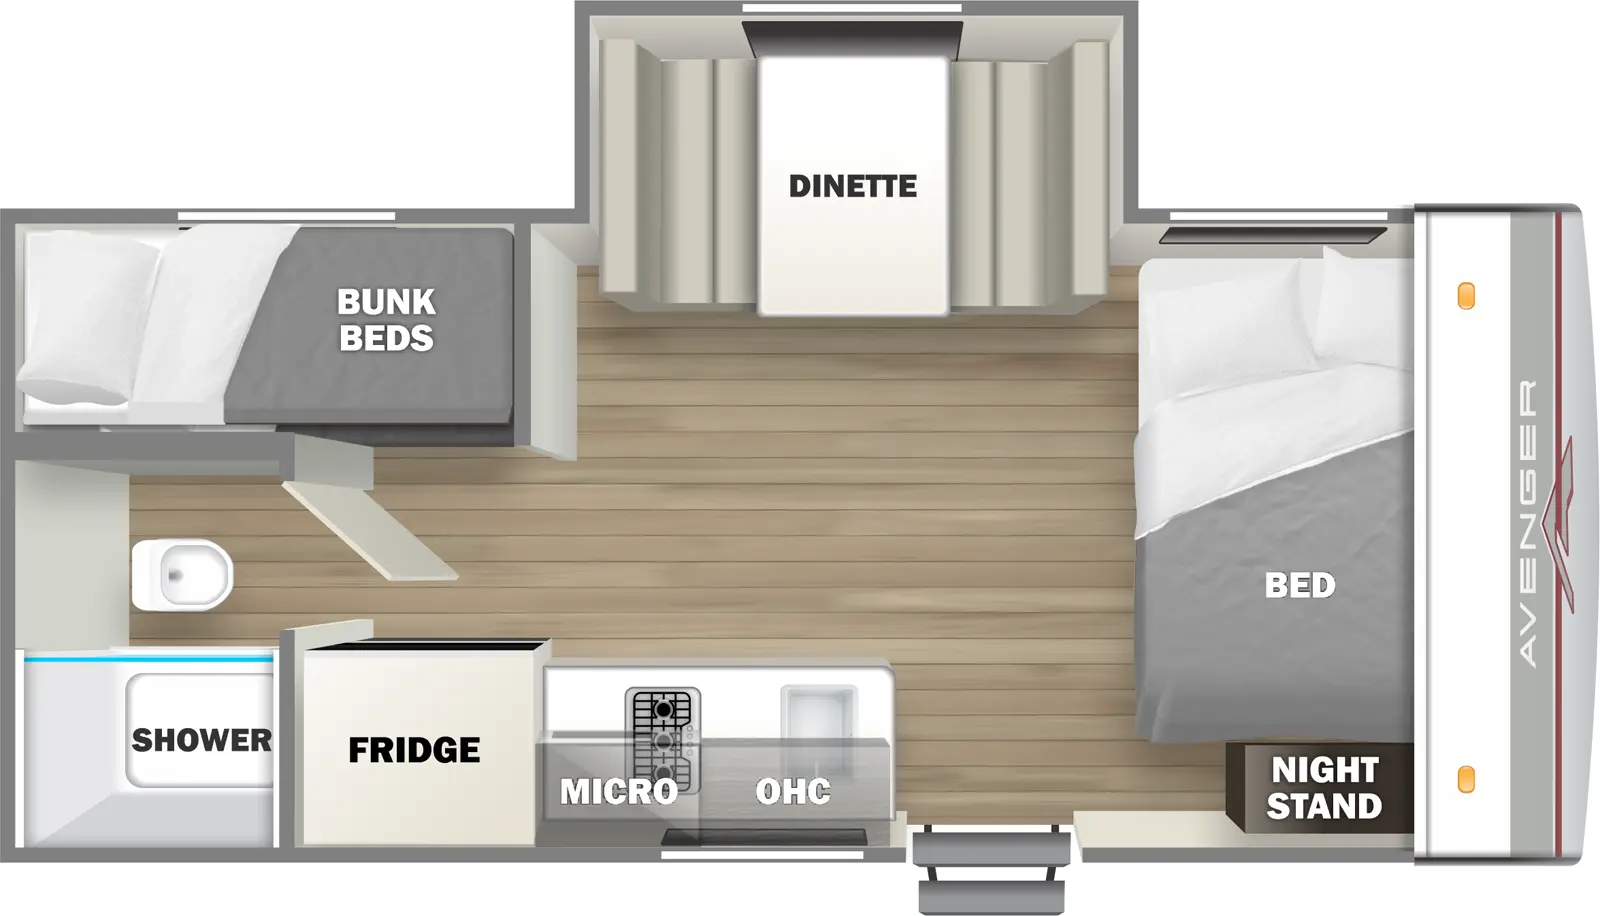 The 17BHS has one slideout and one entry. Interior layout front to back: side facing bed and night stand; off-door side dinette slideout; door side entry, kitchen counter with sink, overhead cabinet, microwave, cooktop, and refrigerator; rear off-door side bunk beds; rear door side bathroom with shower and toilet only.